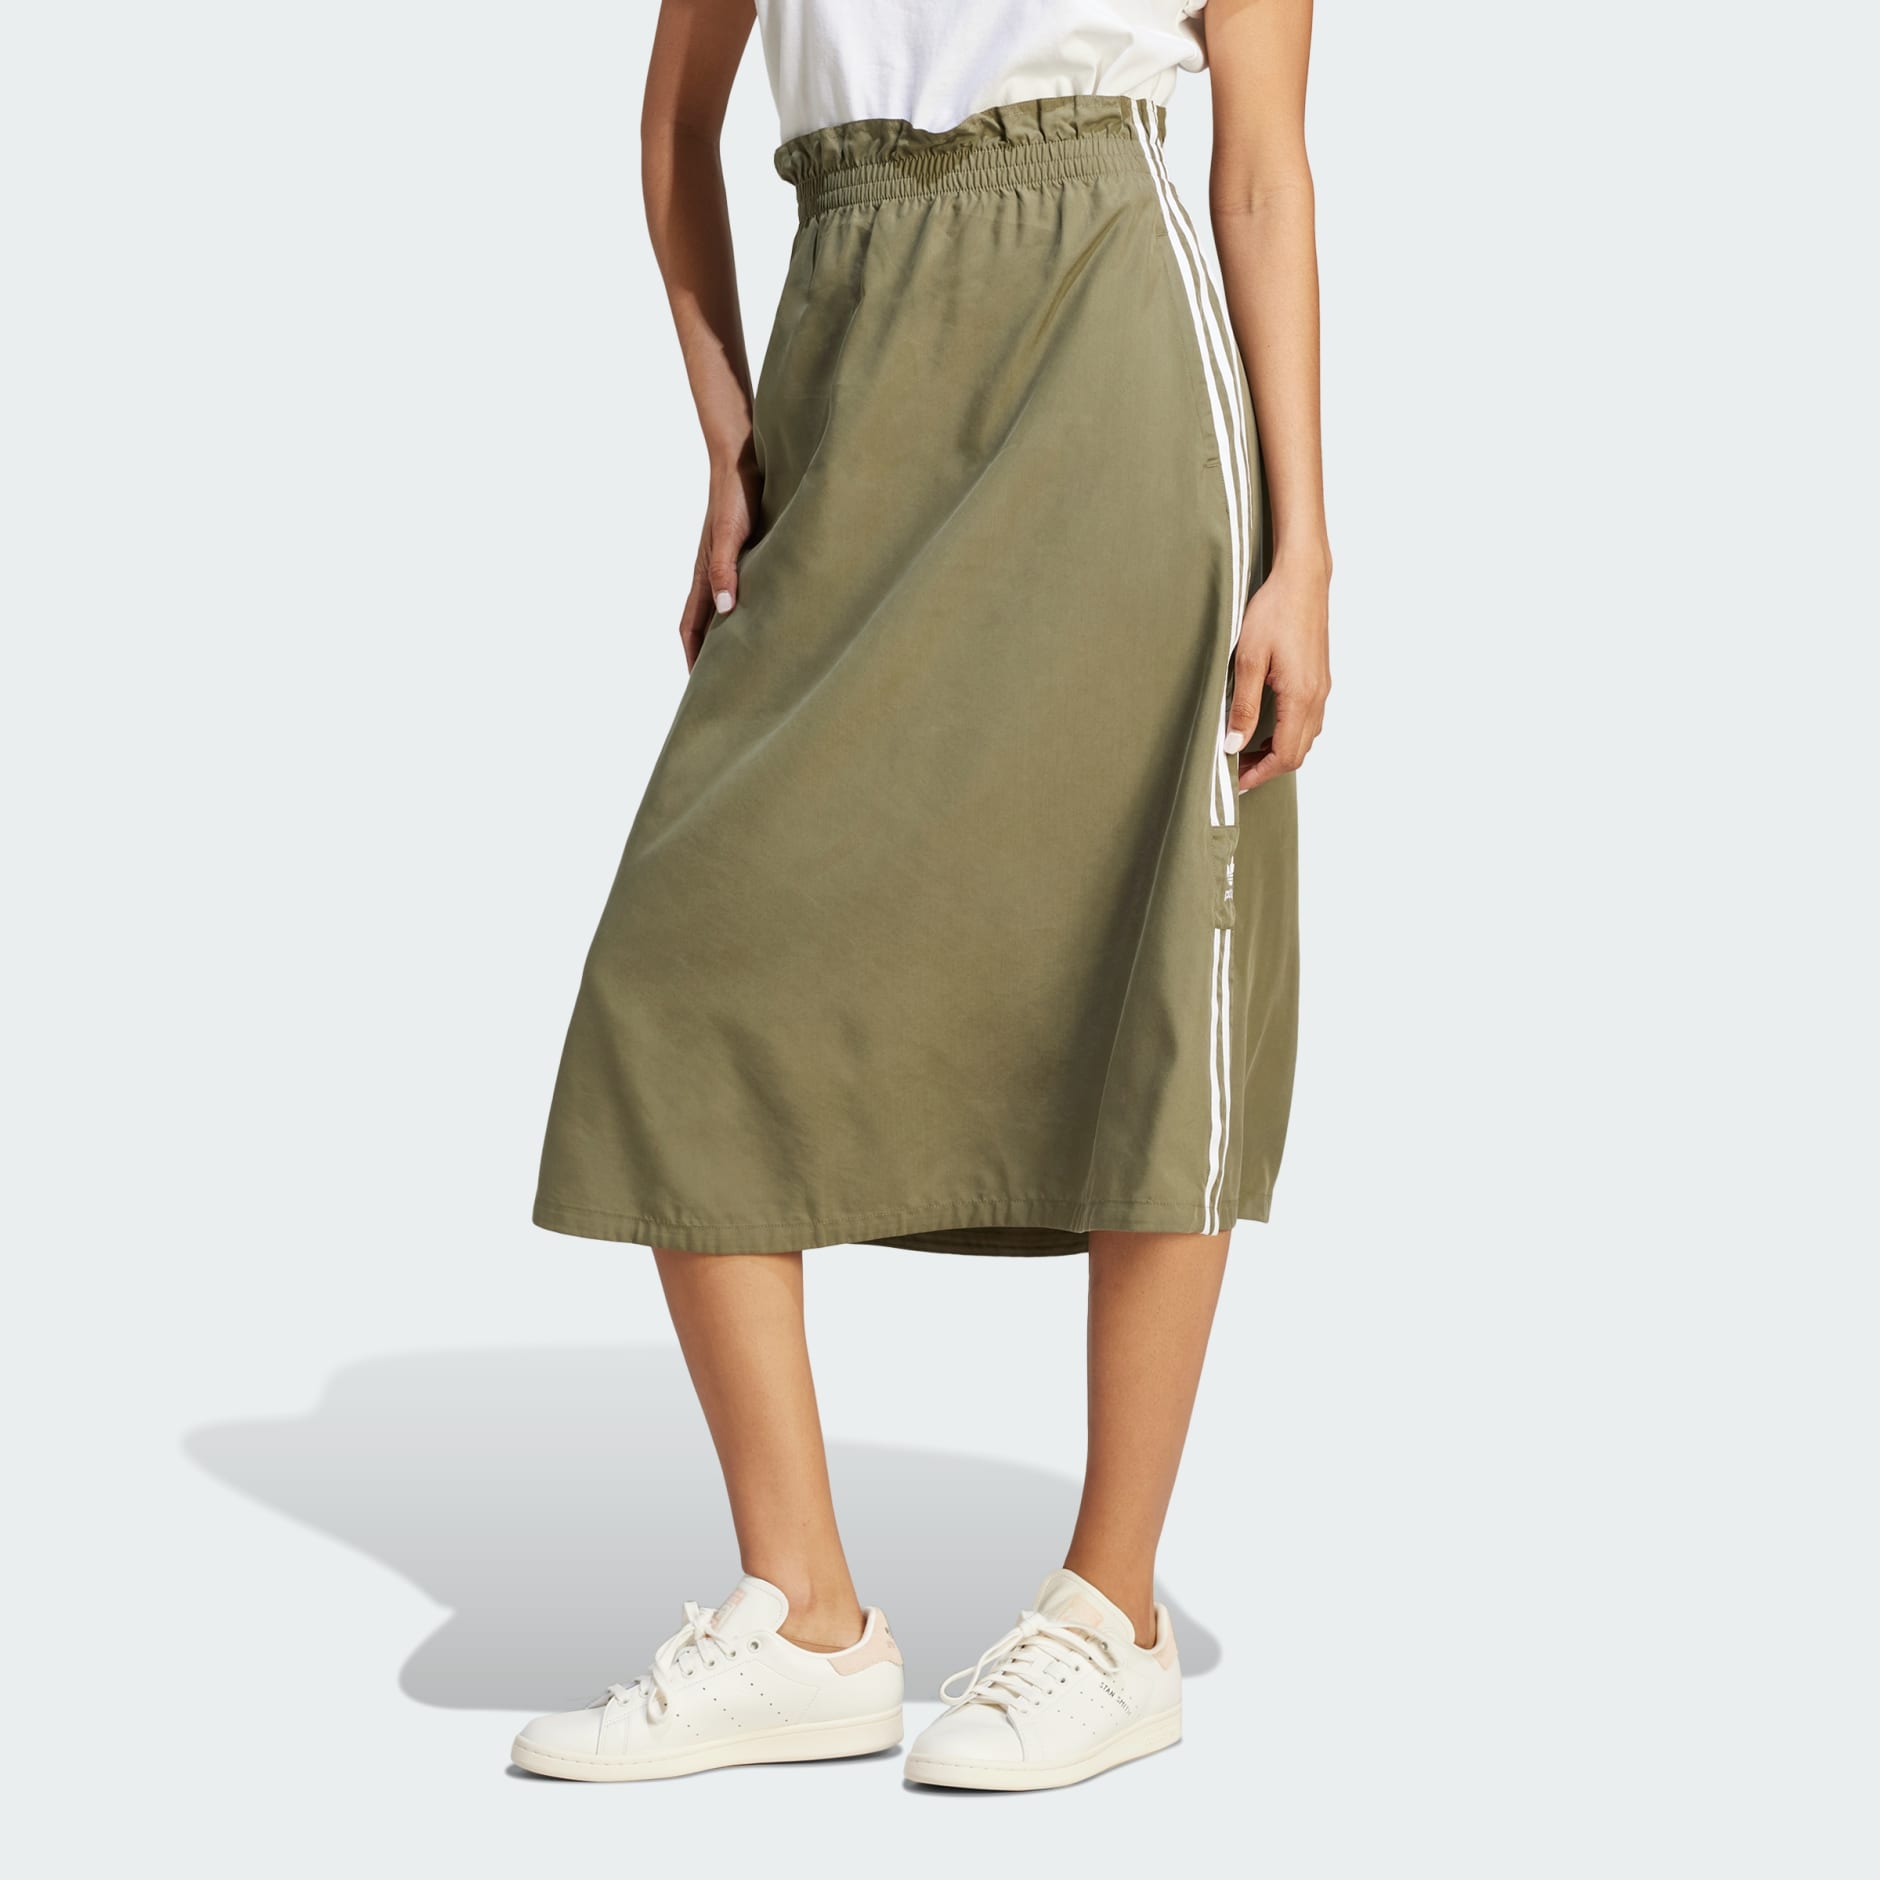 Clothing - Parley Skirt - Green | adidas South Africa